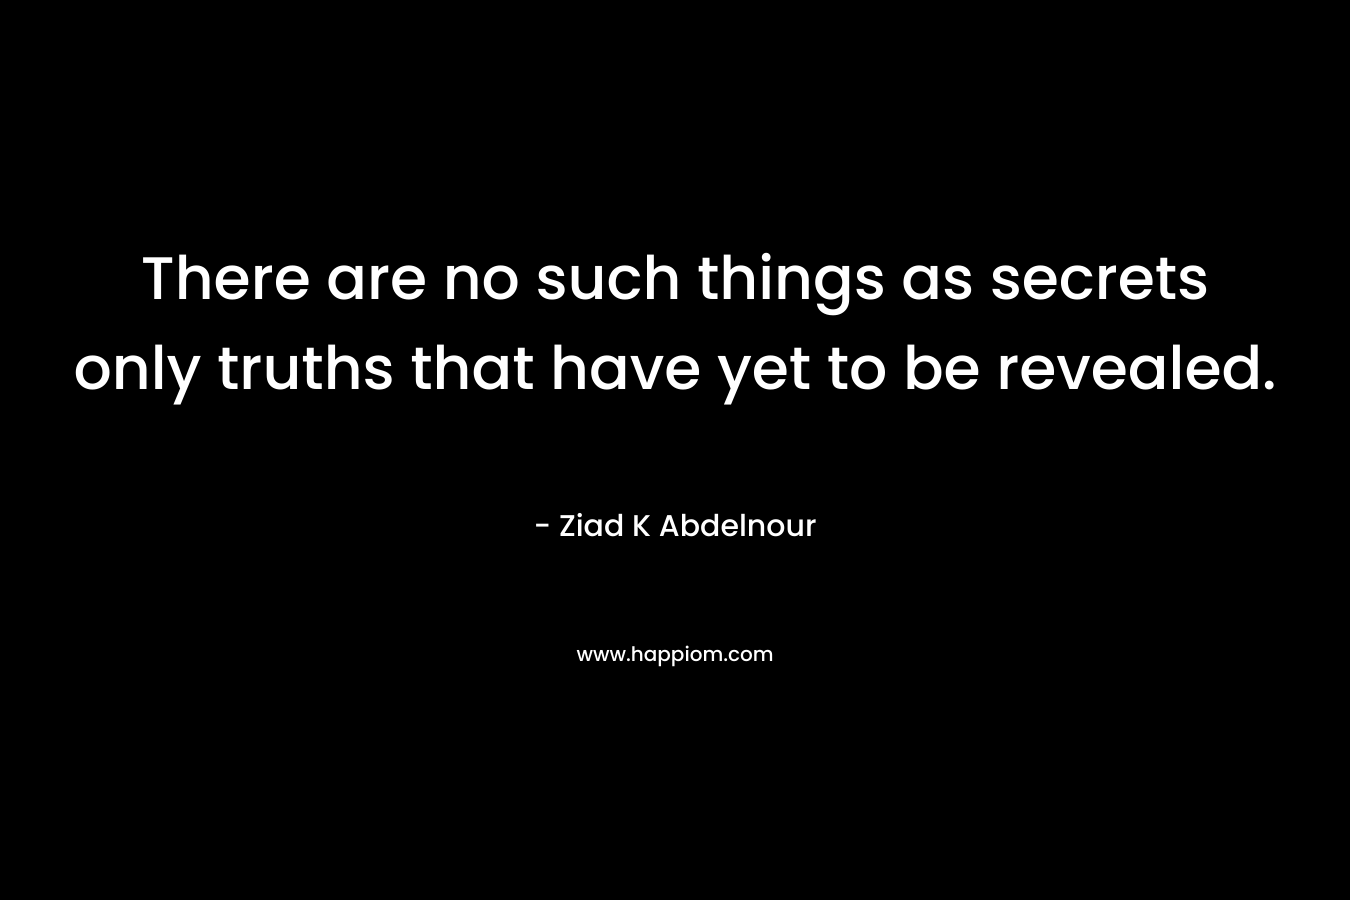 There are no such things as secrets only truths that have yet to be revealed. – Ziad K Abdelnour